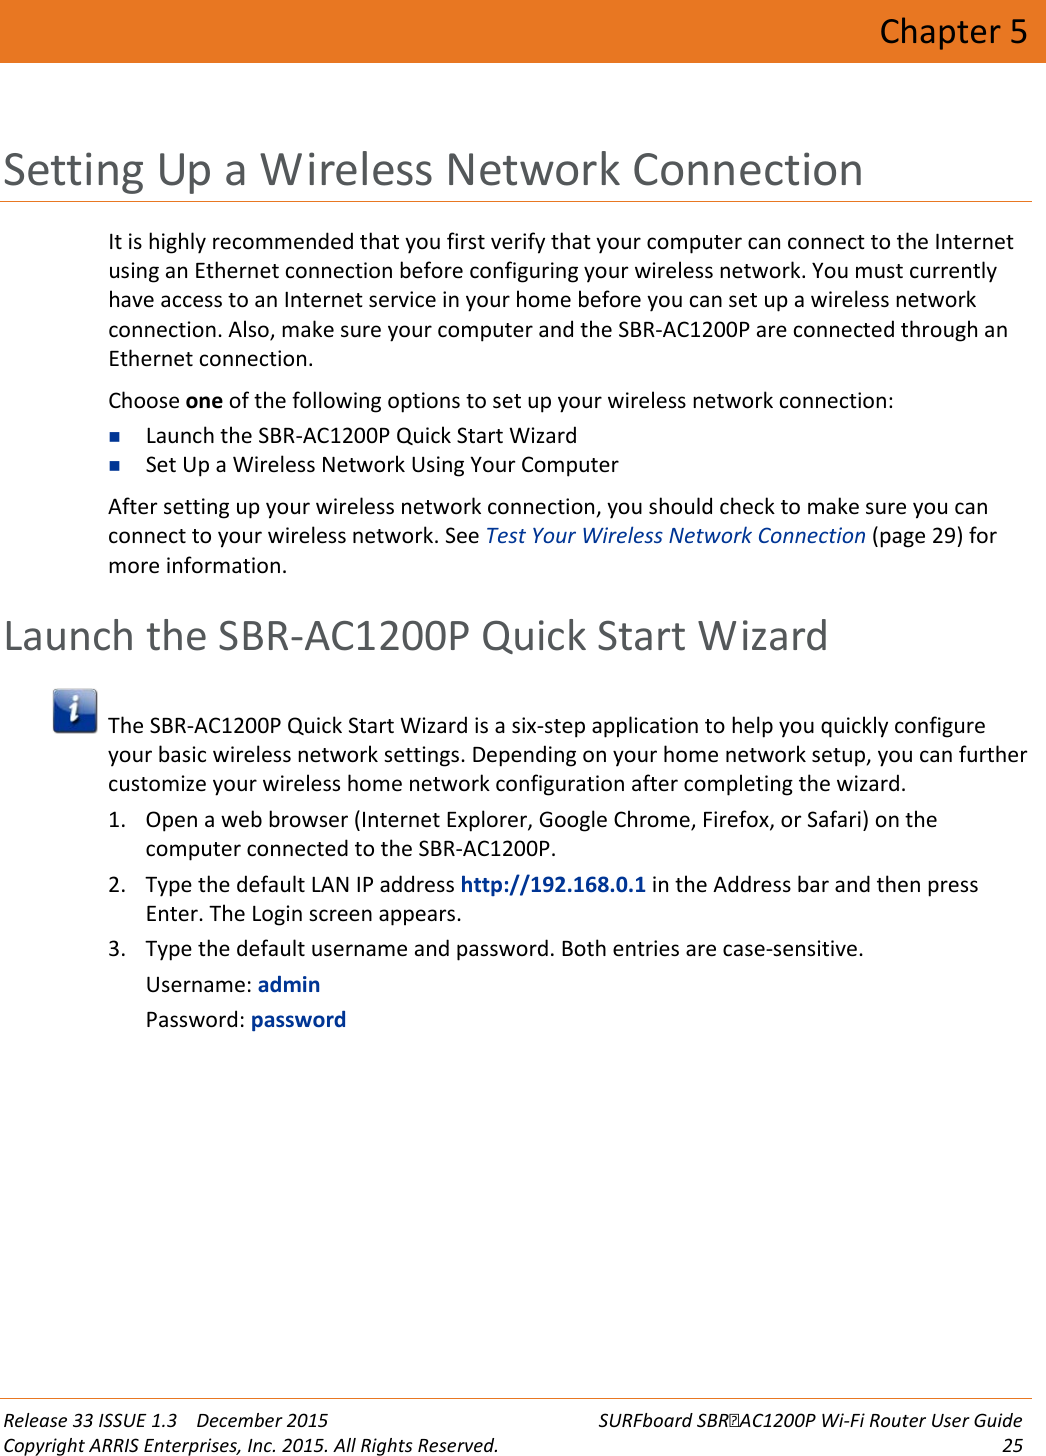  Release 33 ISSUE 1.3    December 2015 SURFboard SBRAC1200P Wi-Fi Router User Guide Copyright ARRIS Enterprises, Inc. 2015. All Rights Reserved. 25  Chapter 5 Setting Up a Wireless Network Connection It is highly recommended that you first verify that your computer can connect to the Internet using an Ethernet connection before configuring your wireless network. You must currently have access to an Internet service in your home before you can set up a wireless network connection. Also, make sure your computer and the SBR-AC1200P are connected through an Ethernet connection. Choose one of the following options to set up your wireless network connection:  Launch the SBR-AC1200P Quick Start Wizard  Set Up a Wireless Network Using Your Computer After setting up your wireless network connection, you should check to make sure you can connect to your wireless network. See Test Your Wireless Network Connection (page 29) for more information.   Launch the SBR-AC1200P Quick Start Wizard  The SBR-AC1200P Quick Start Wizard is a six-step application to help you quickly configure your basic wireless network settings. Depending on your home network setup, you can further customize your wireless home network configuration after completing the wizard. 1. Open a web browser (Internet Explorer, Google Chrome, Firefox, or Safari) on the computer connected to the SBR-AC1200P. 2. Type the default LAN IP address http://192.168.0.1 in the Address bar and then press Enter. The Login screen appears. 3. Type the default username and password. Both entries are case-sensitive. Username: admin Password: password 